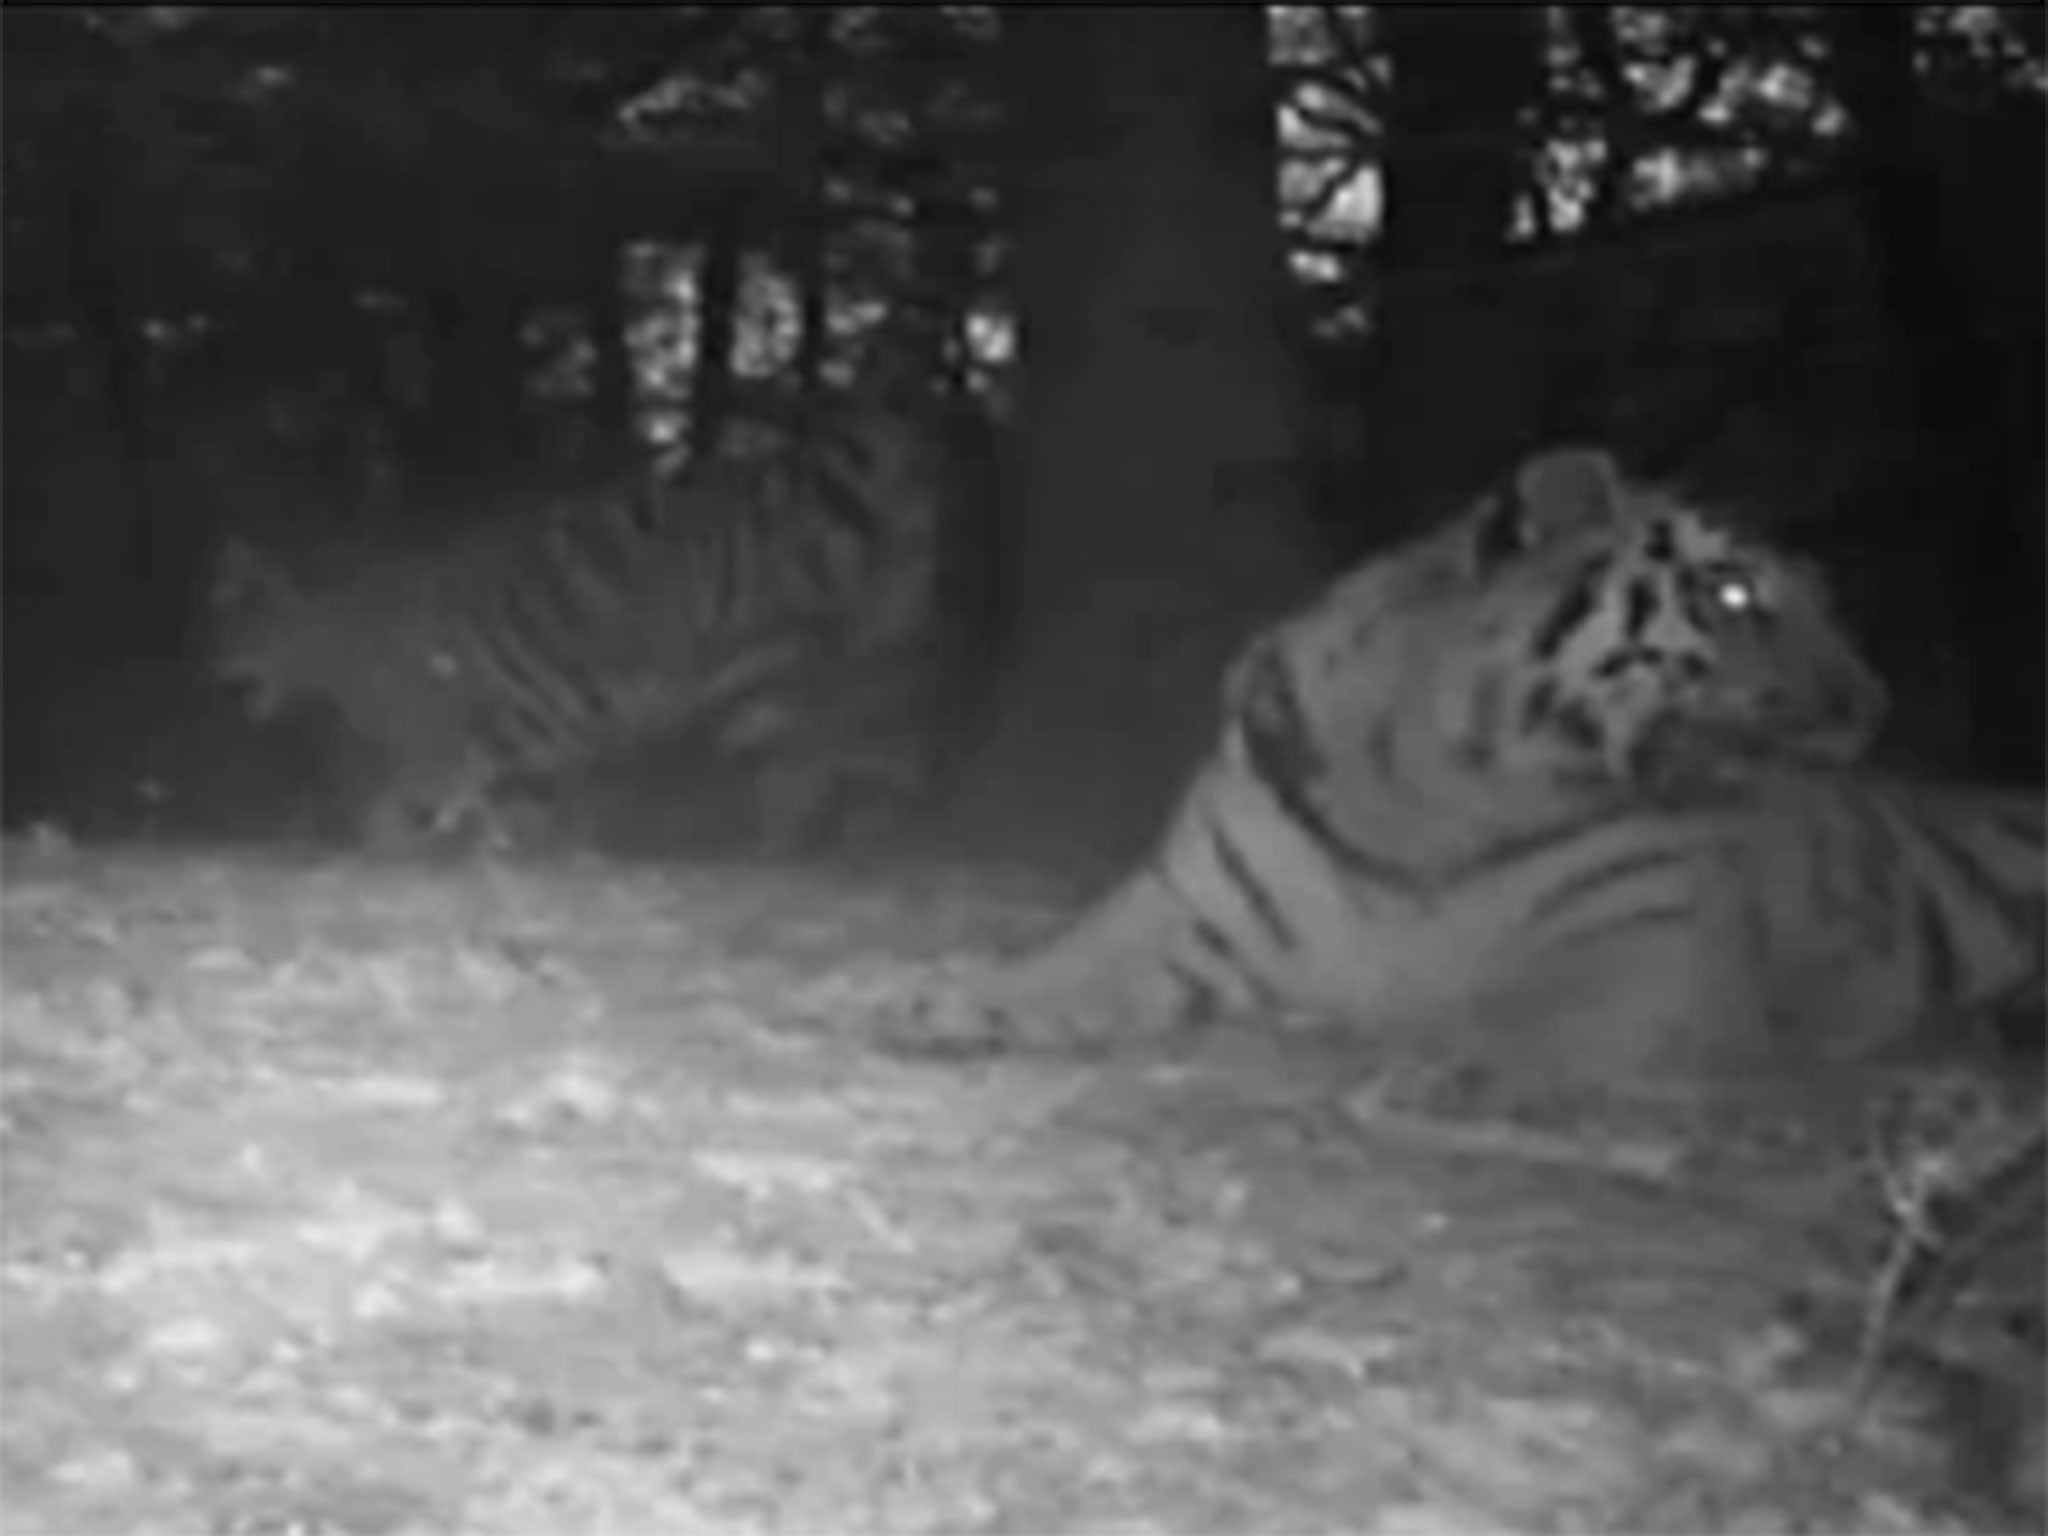 The tigers were caught on the cameras set up by the WWF